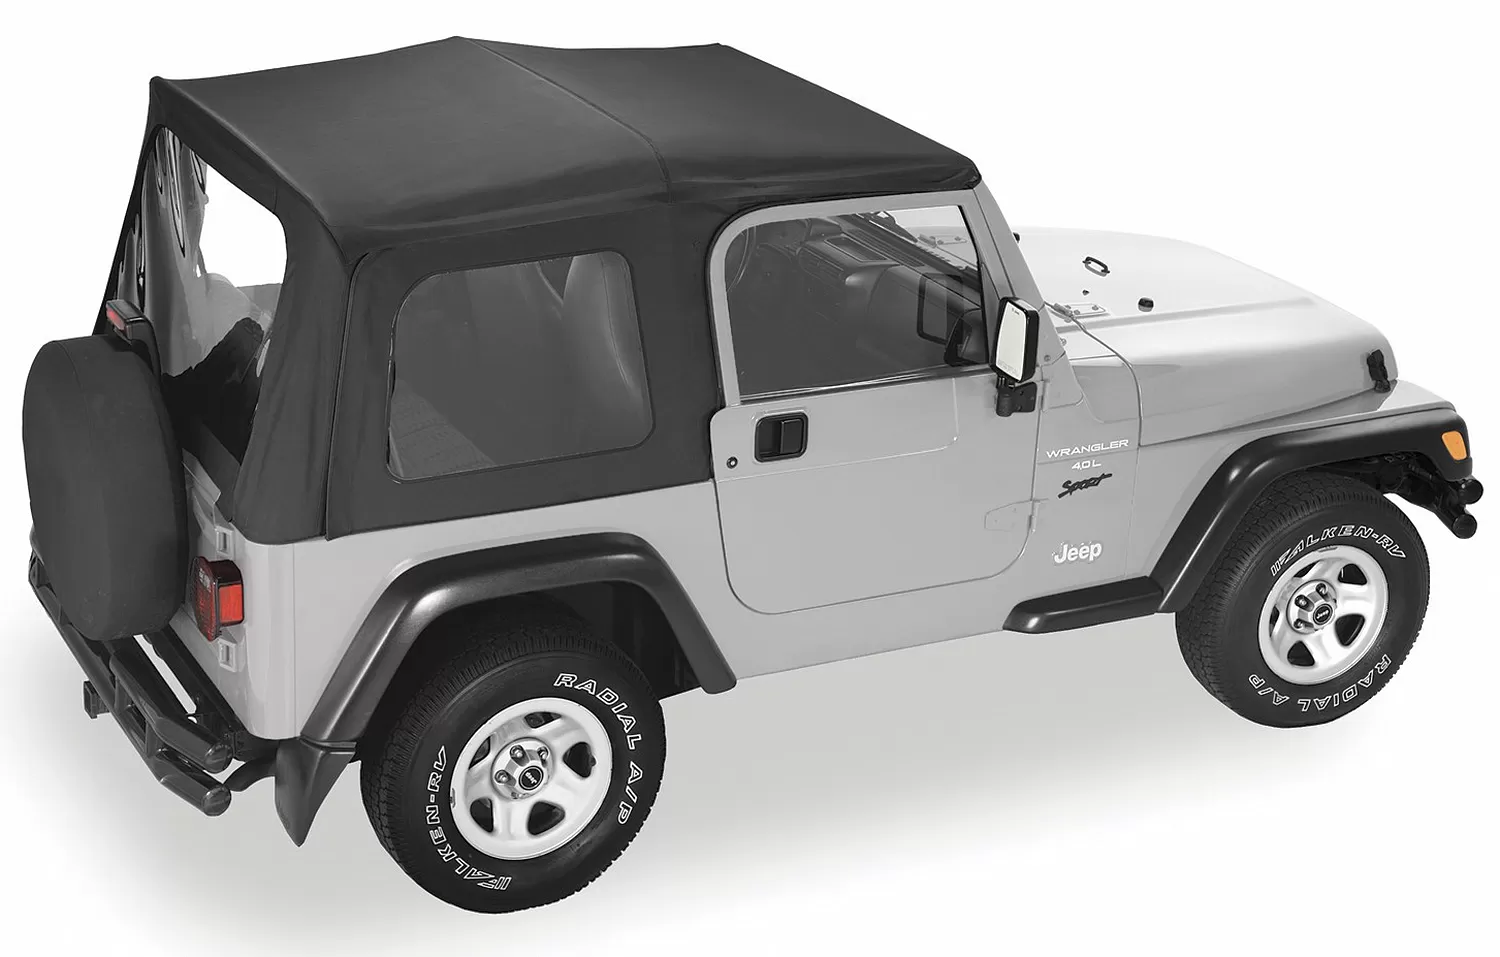 Pavement Ends By Bestop Black Diamond Replay OEM Replacement Soft Top Clear Windows w/ Upper Door Skins Jeep Wrangler 1997-2006 - 51131-35